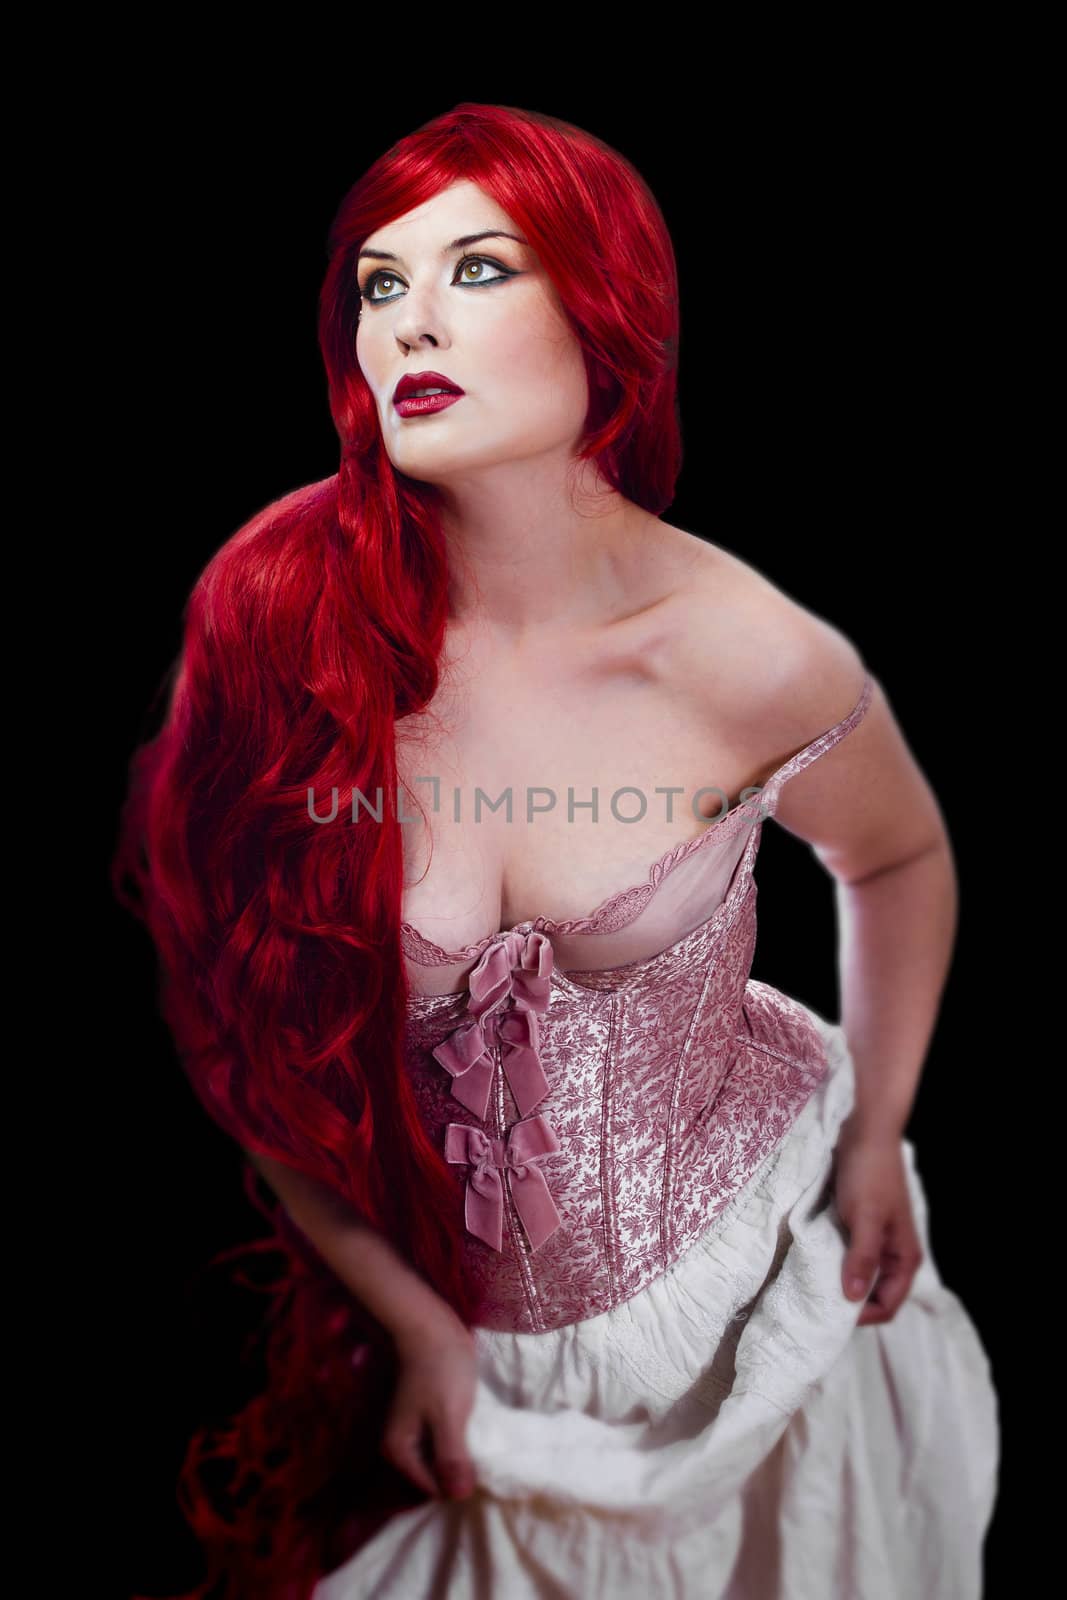 Red haired woman in lingerie over black background by FernandoCortes